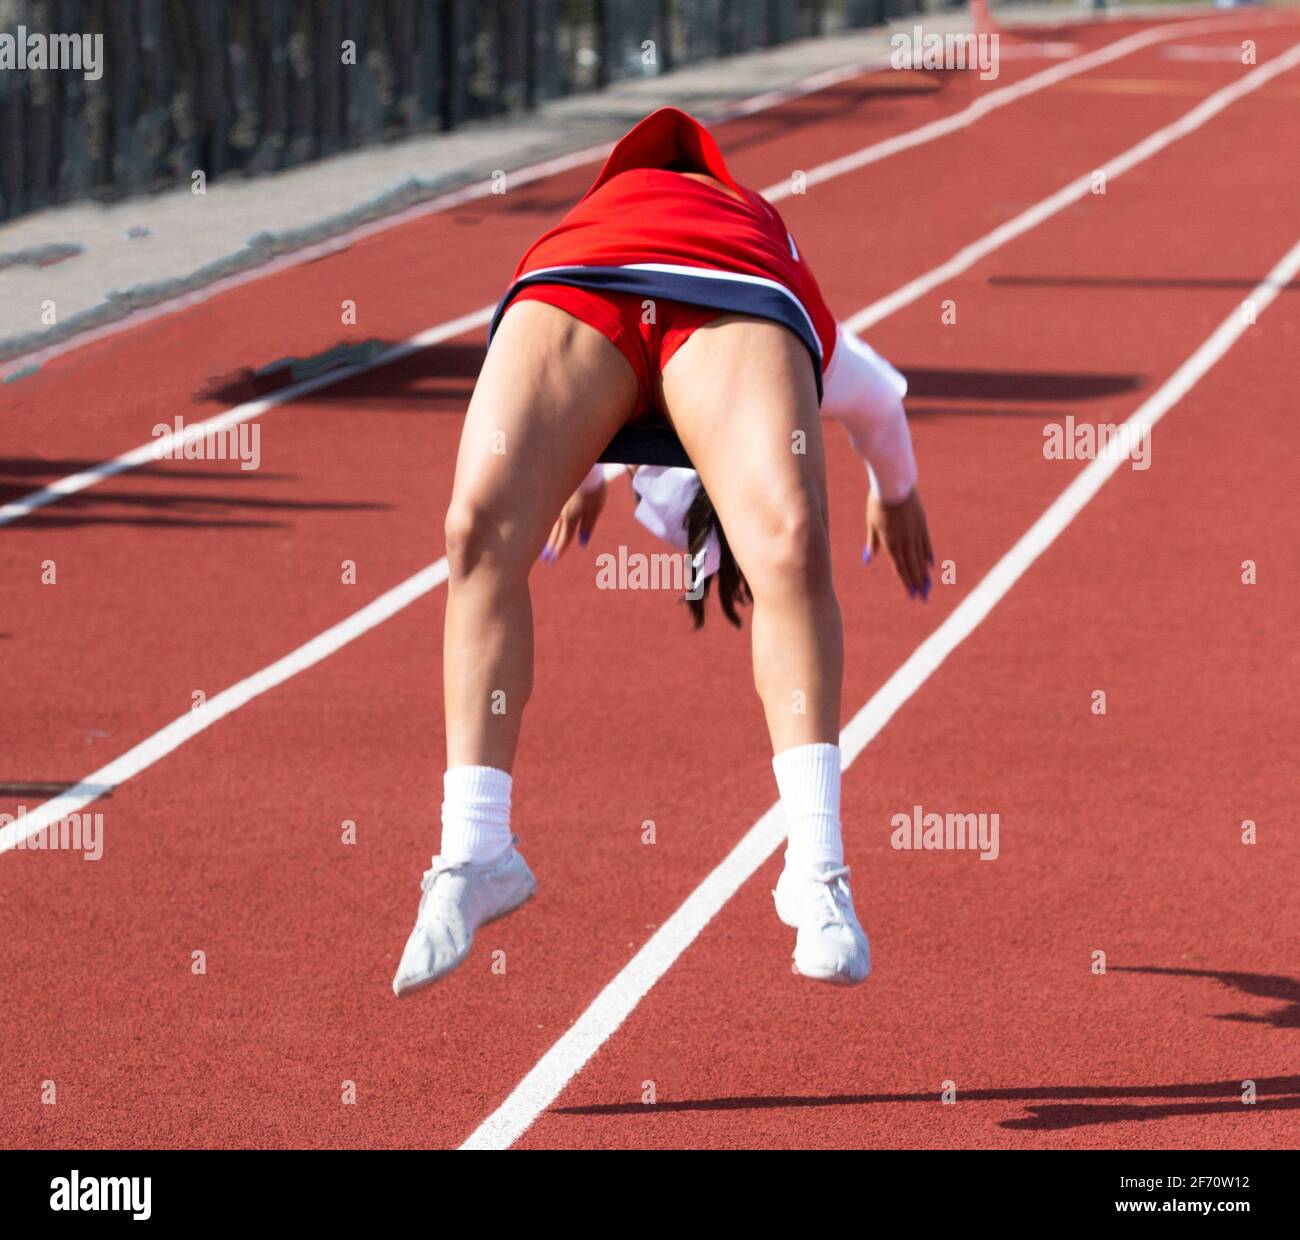 A high school cheerleader performs flips on a red track during a break in a football game. Stock Photo